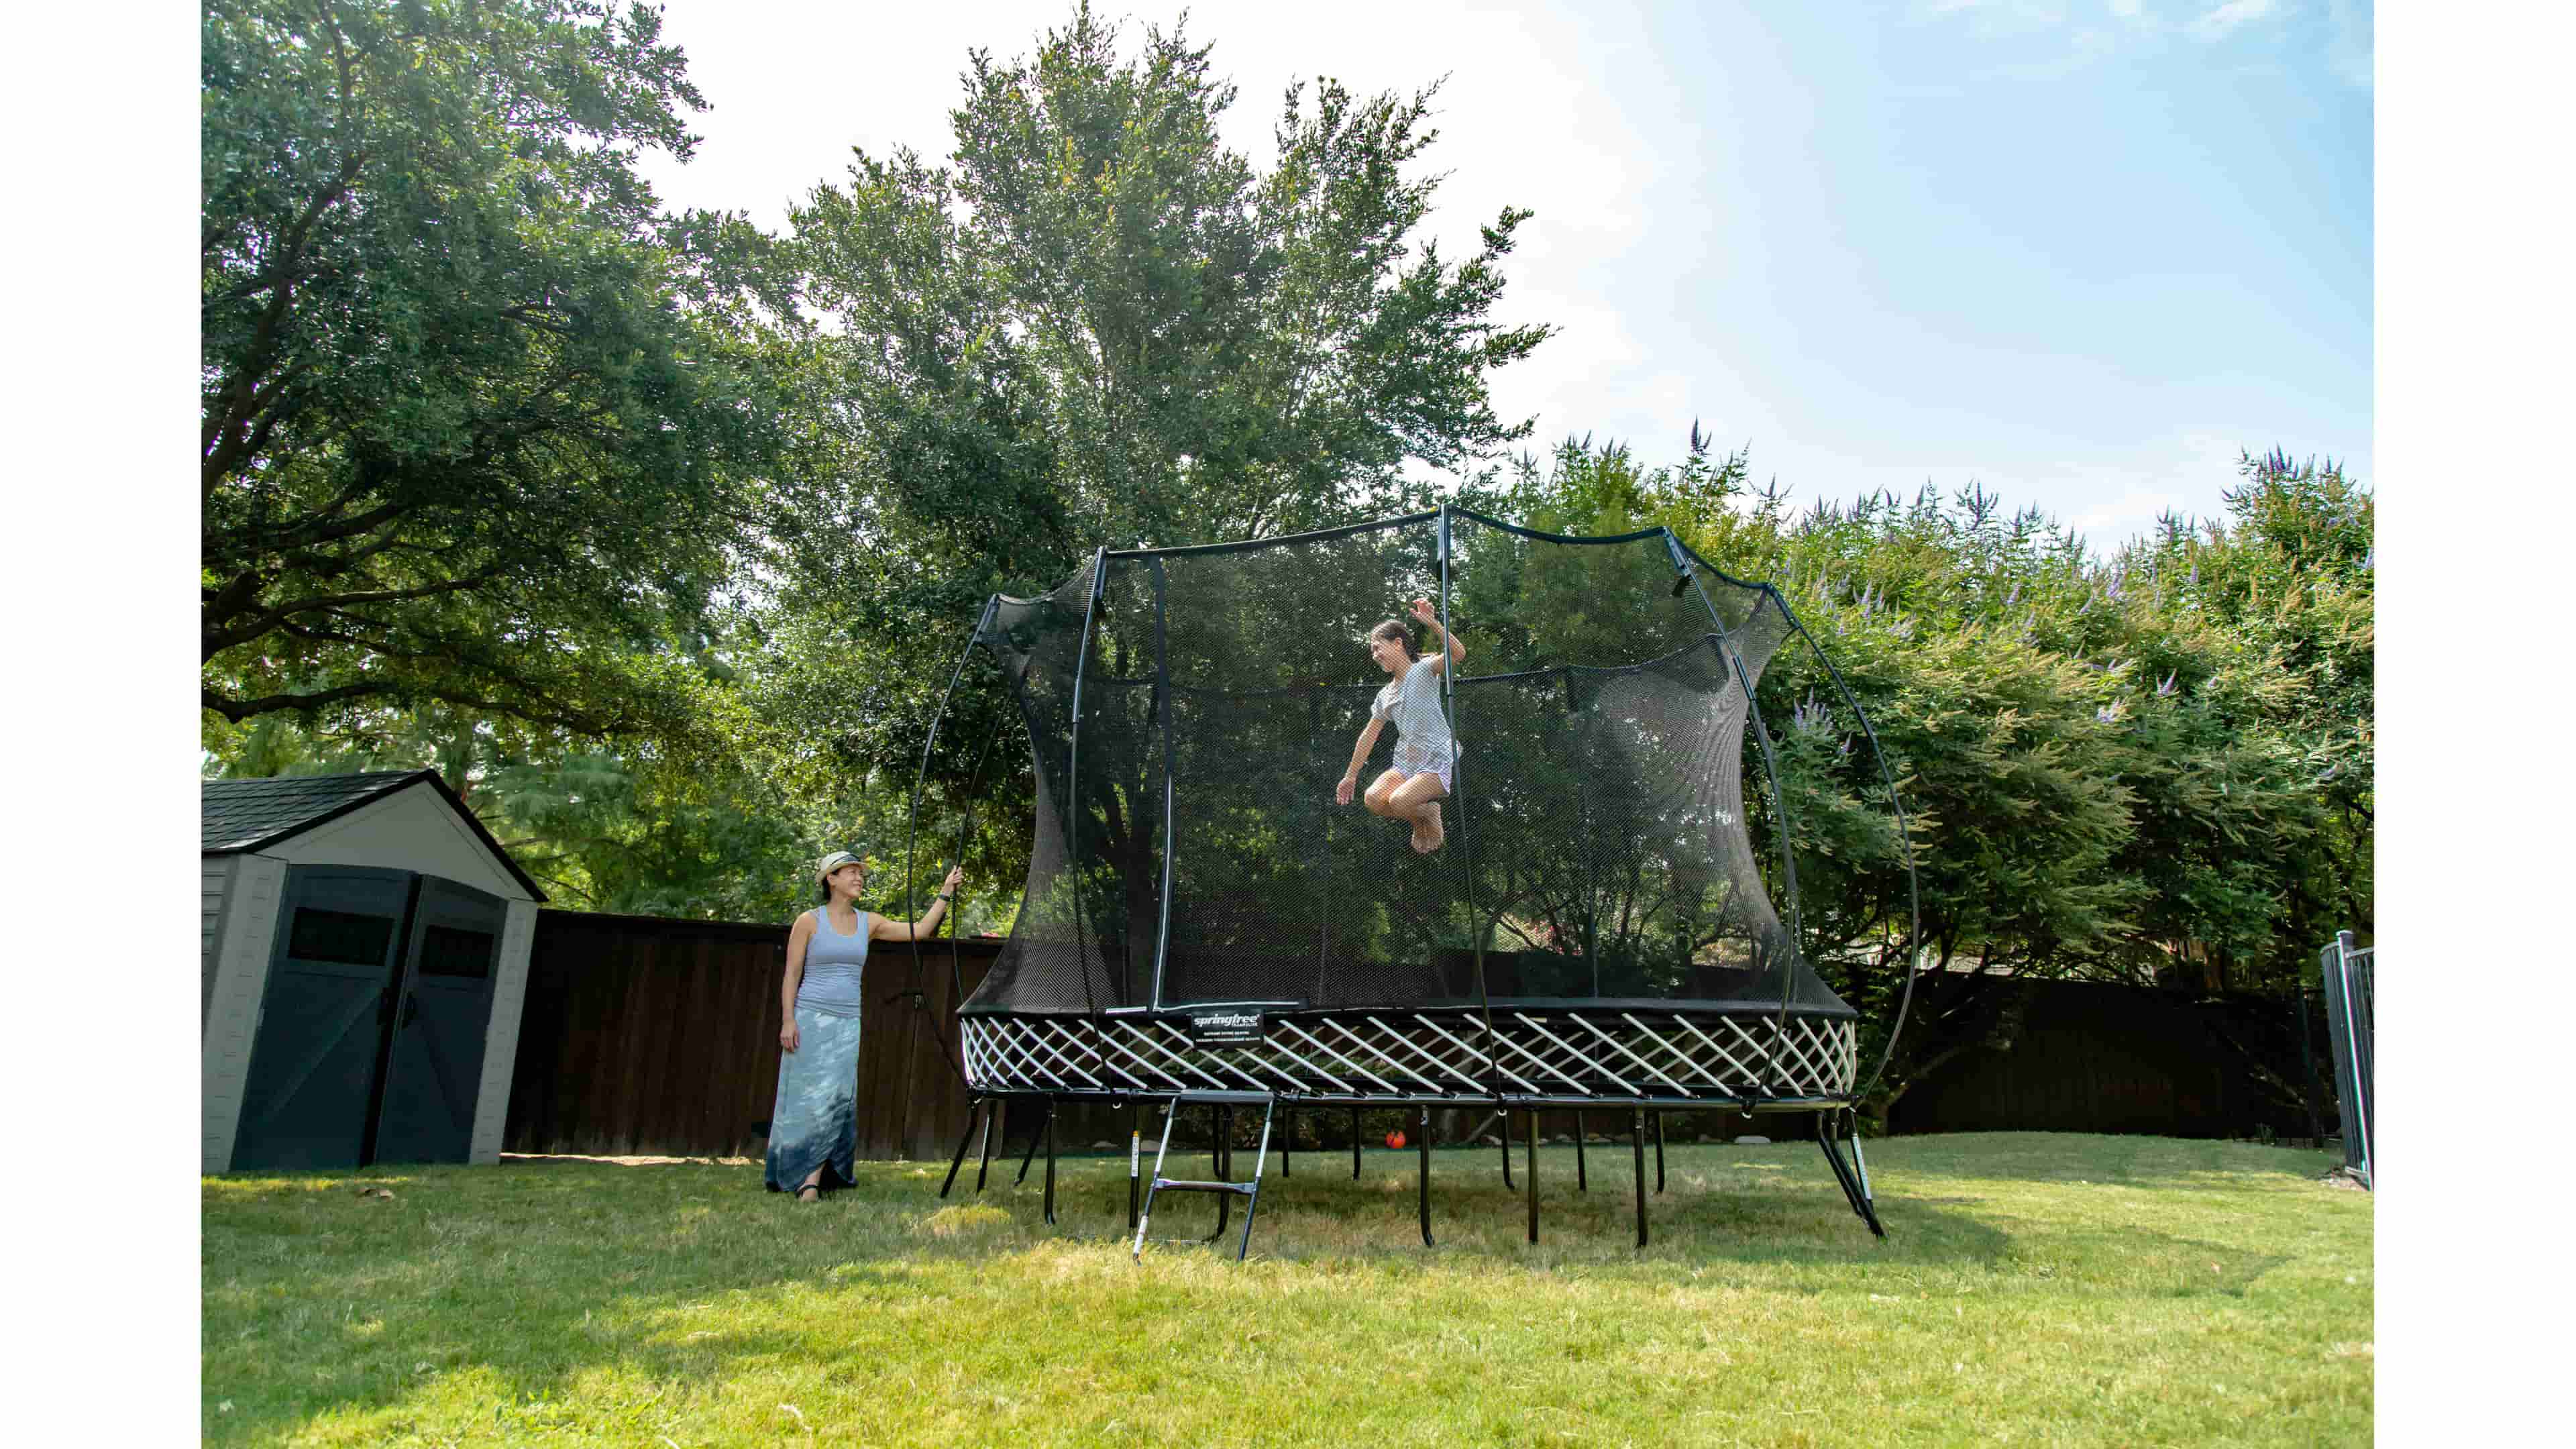 Should You Buy a Trampoline? | Honest Analysis 